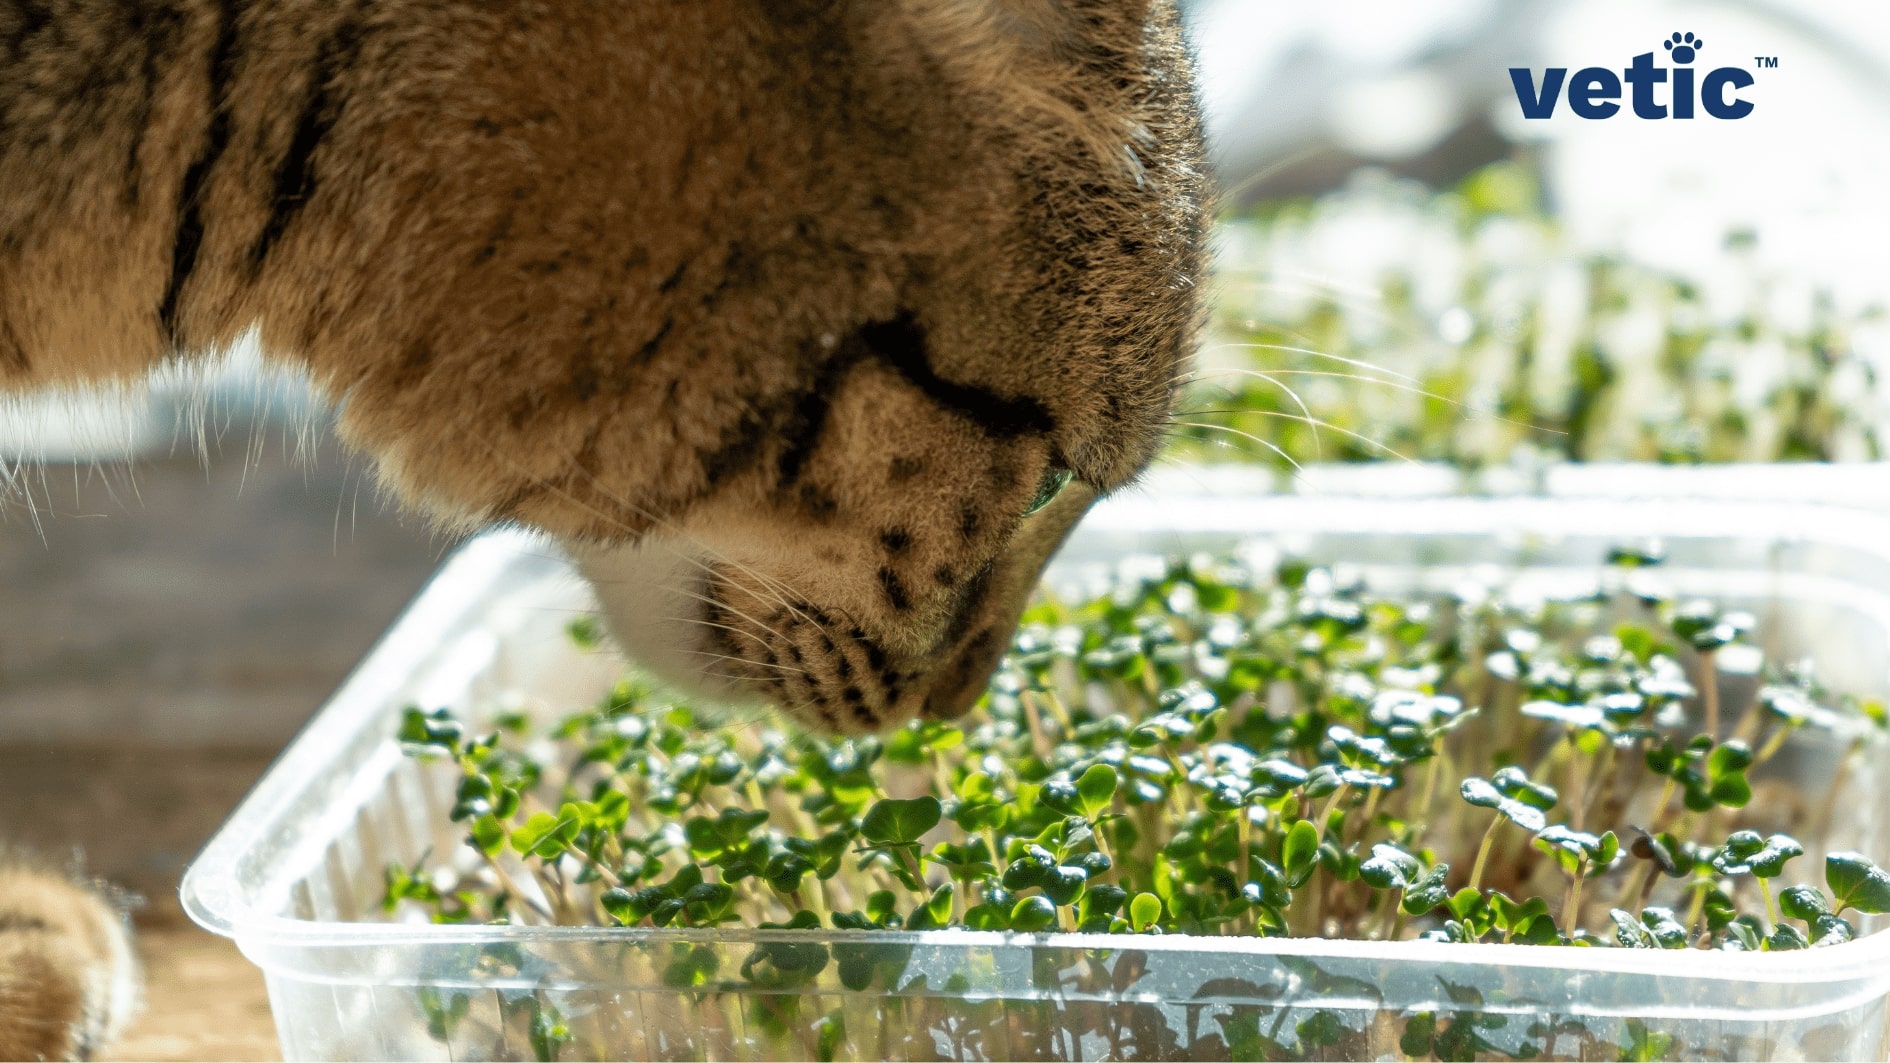 A very close shot of a cat sniffing fresh sprouts grown in a plastic container. only the cat's side profile is visible. the ears and rest of the body is not in the photo. the cat seems to be a ticked mackerel. cats will sniff and chew on leaves, but cats can't thrive on vegetables. it's not natural or healthy for cats be vegetarian.